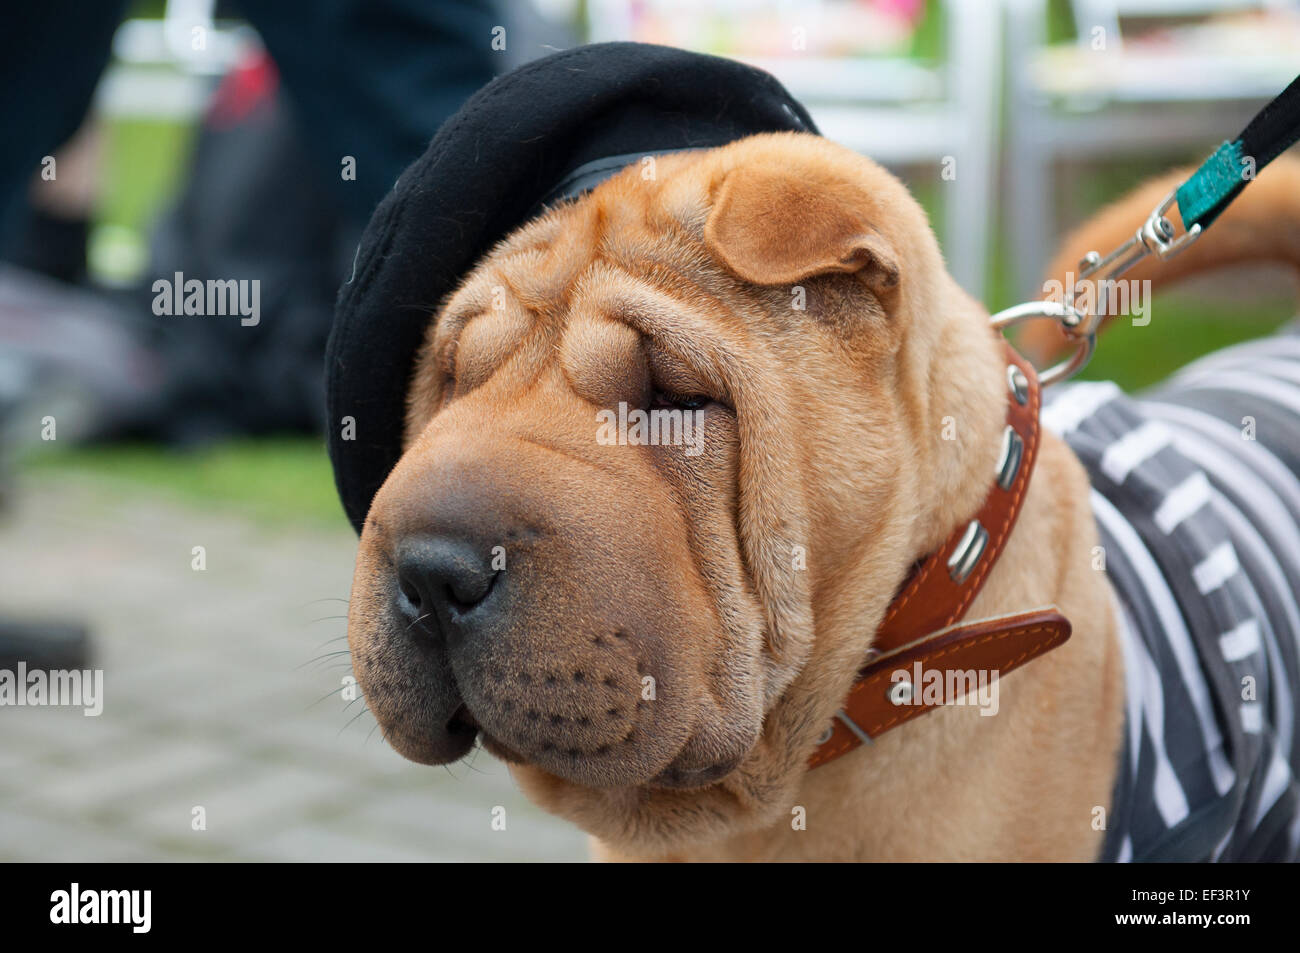 The Shar Pei, is a breed of dog known for its distinctive features of deep wrinkles and a blue-black tongue. Stock Photo